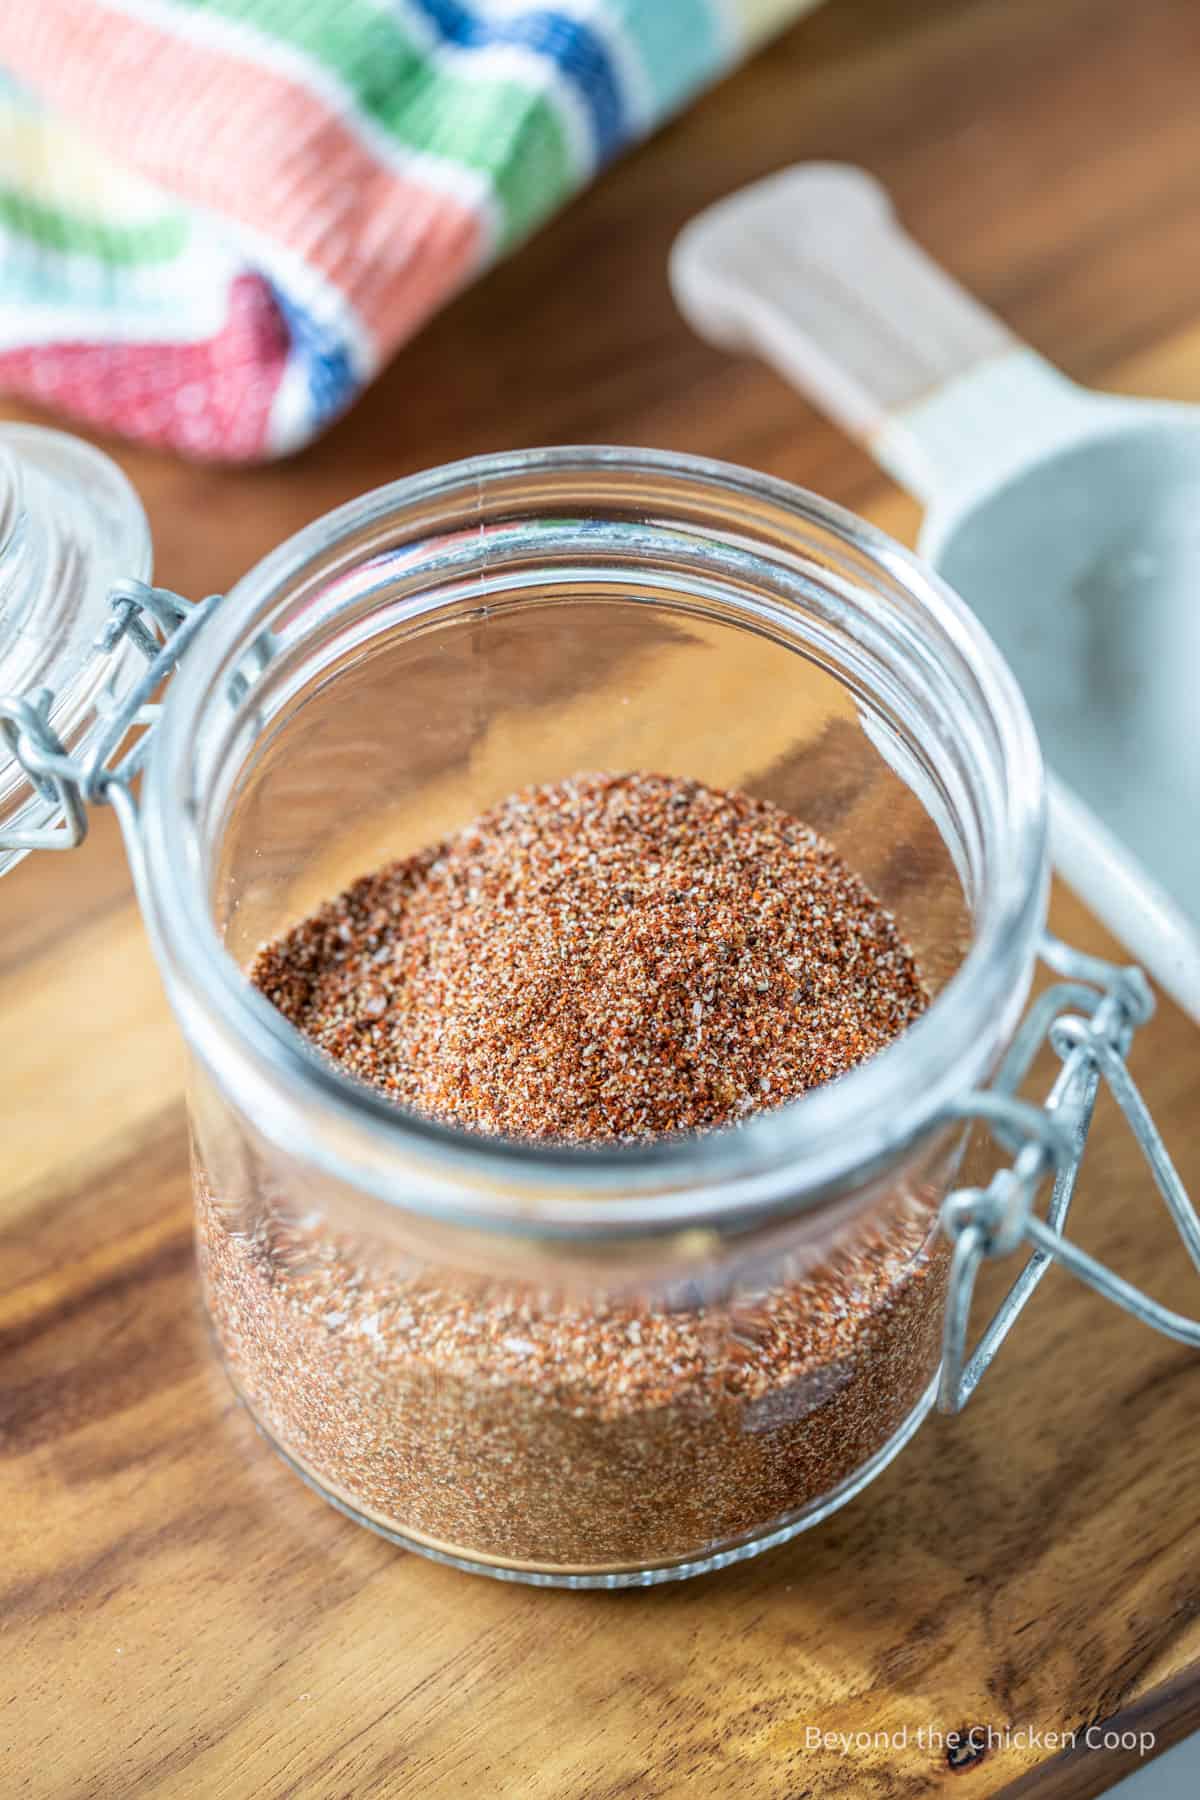 A jar filled with a spice mixture.